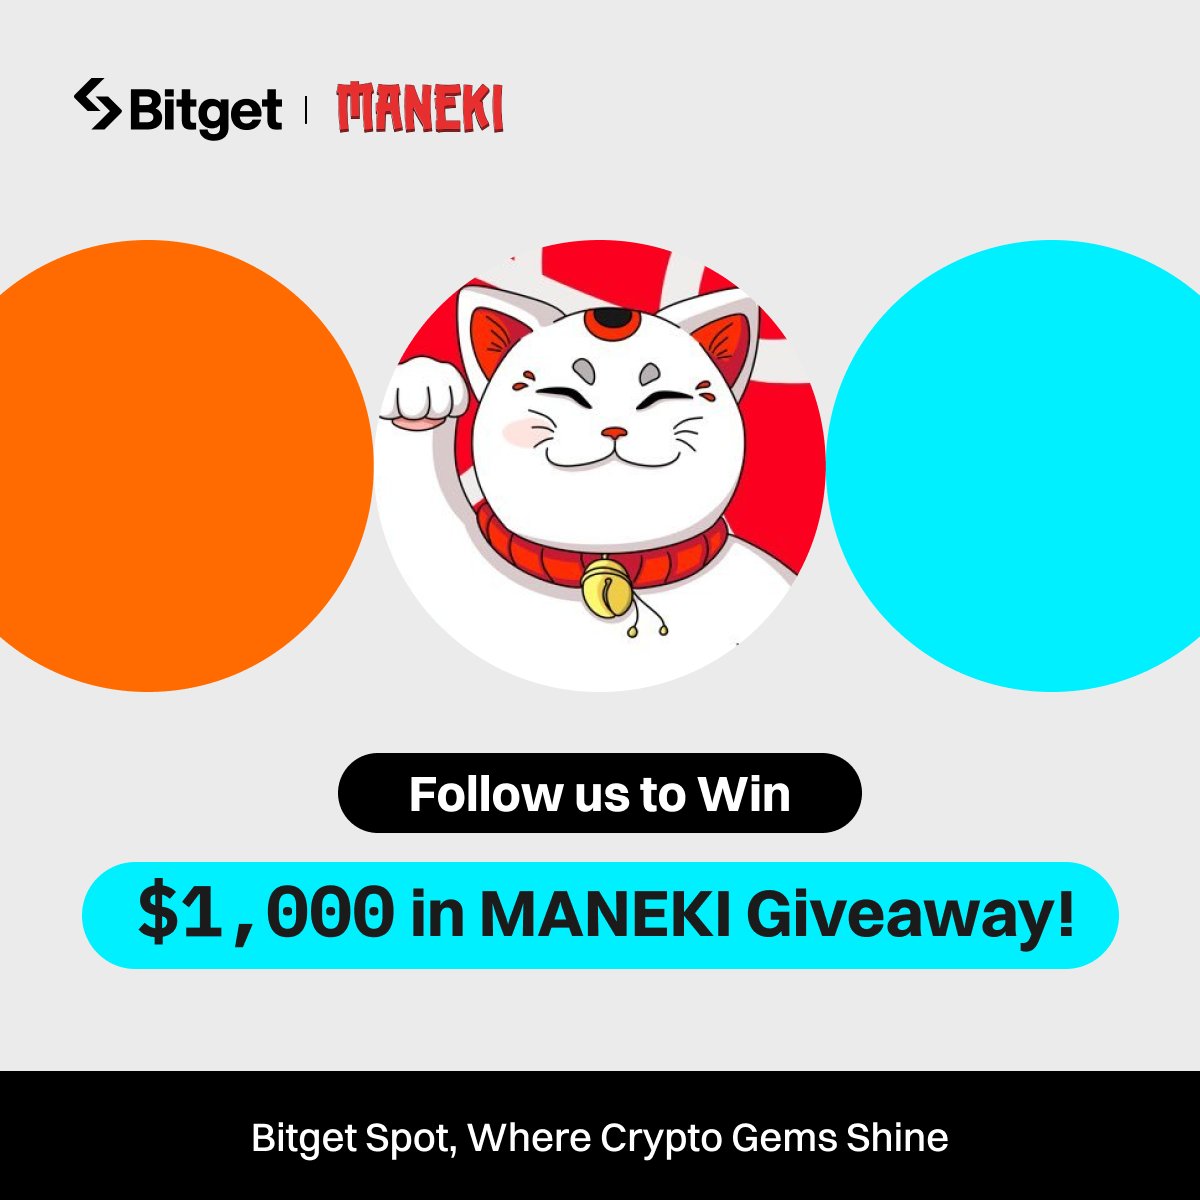 $1,000 GIVEAWAY We're giving away $1,000 worth of $MANEKI to celebrate its listing on #BitgetSpot! 1⃣ Follow @bitgetglobal @UnrevealedXYZ 2⃣ Repost with #MANEKIlistBitget & tag your friends 3⃣ Fill out: forms.gle/WFp7A7Gkw8qJbn… 🎁 20 winners * $50 worth of MANEKI